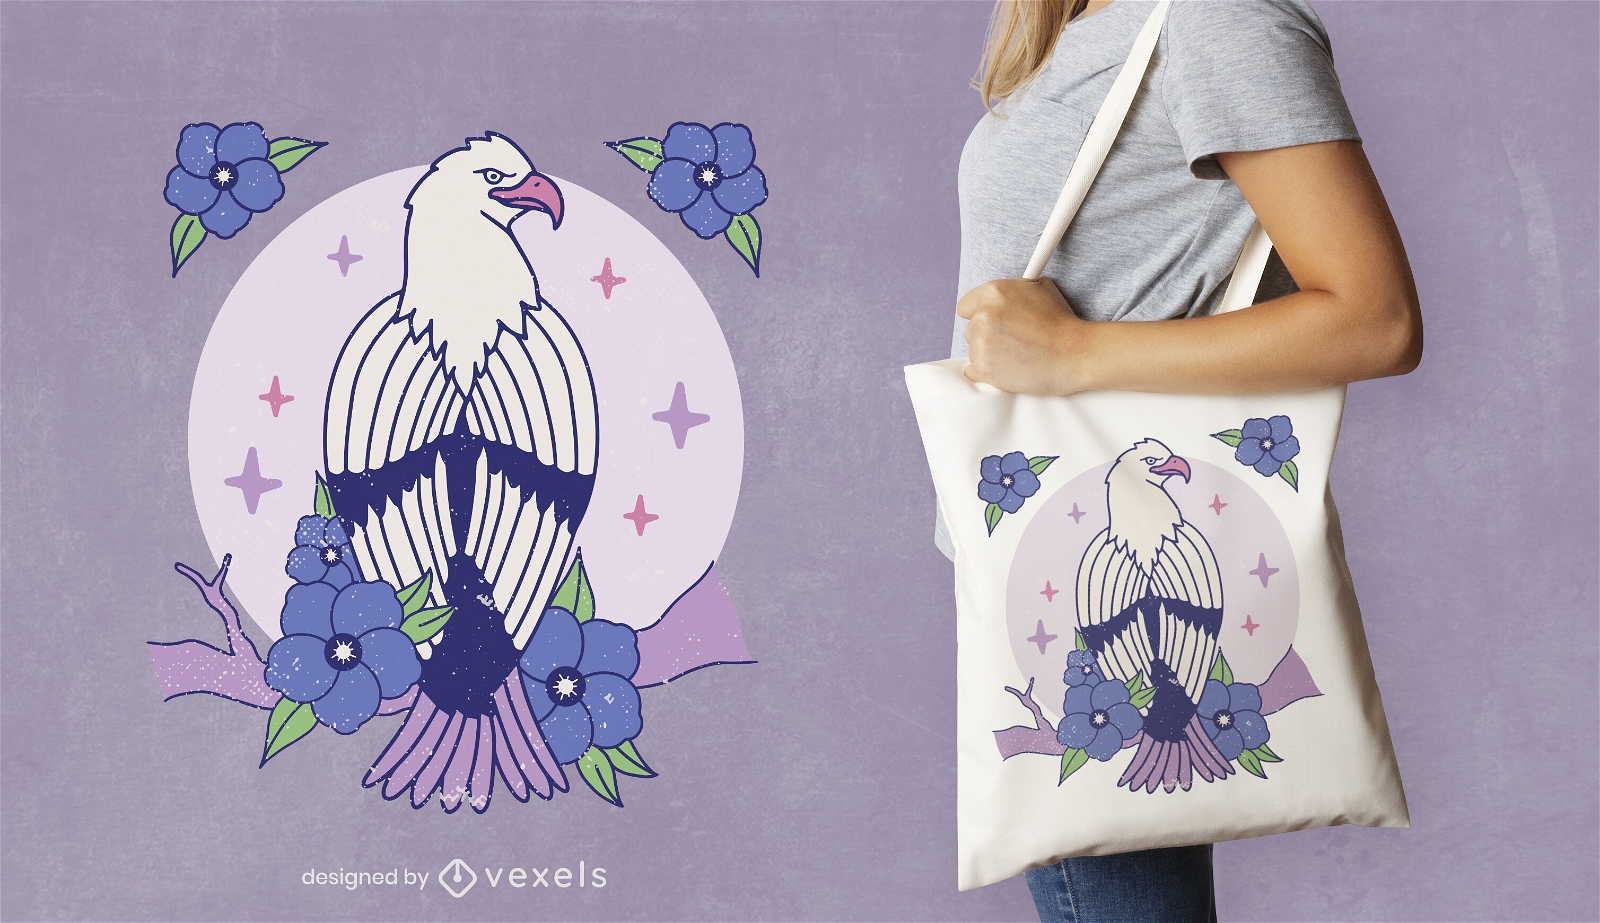 Eagle animal with flowers tote bag design